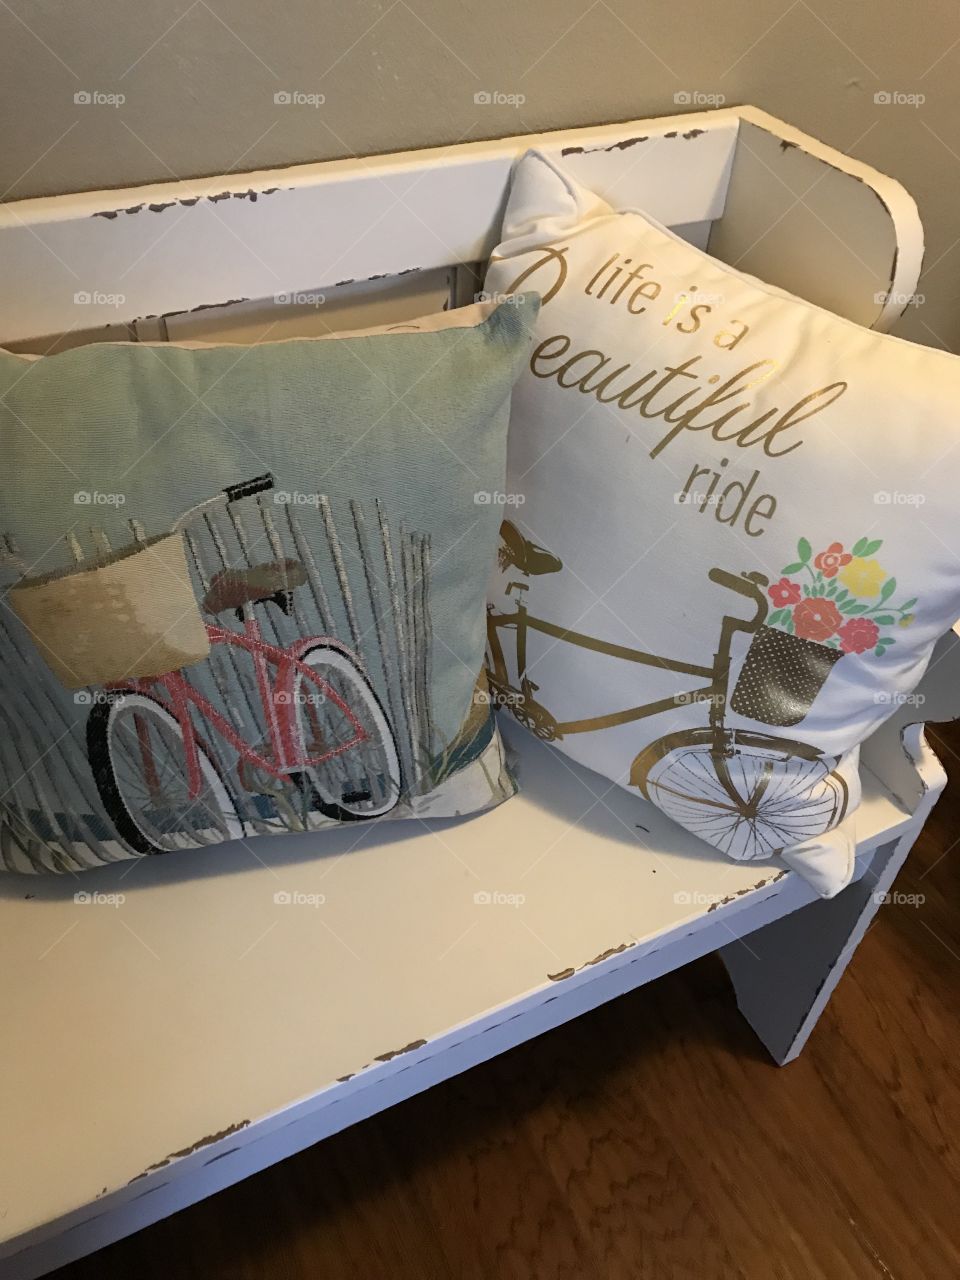 Life is a beautiful ride. Throw pillows on a white distressed bench.